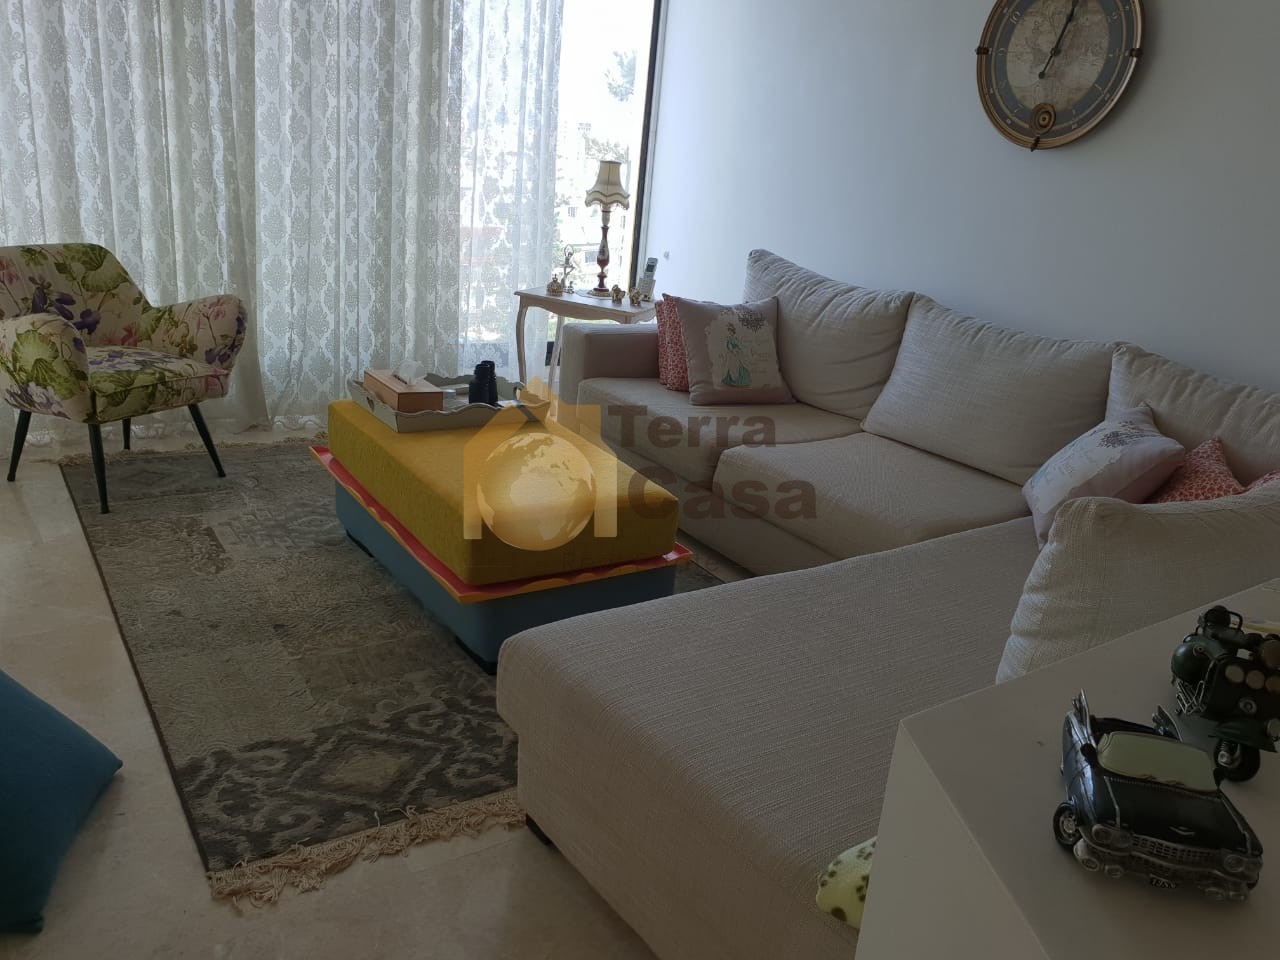 Apartment for sale in jal El Dib fully decorated with open sea view.